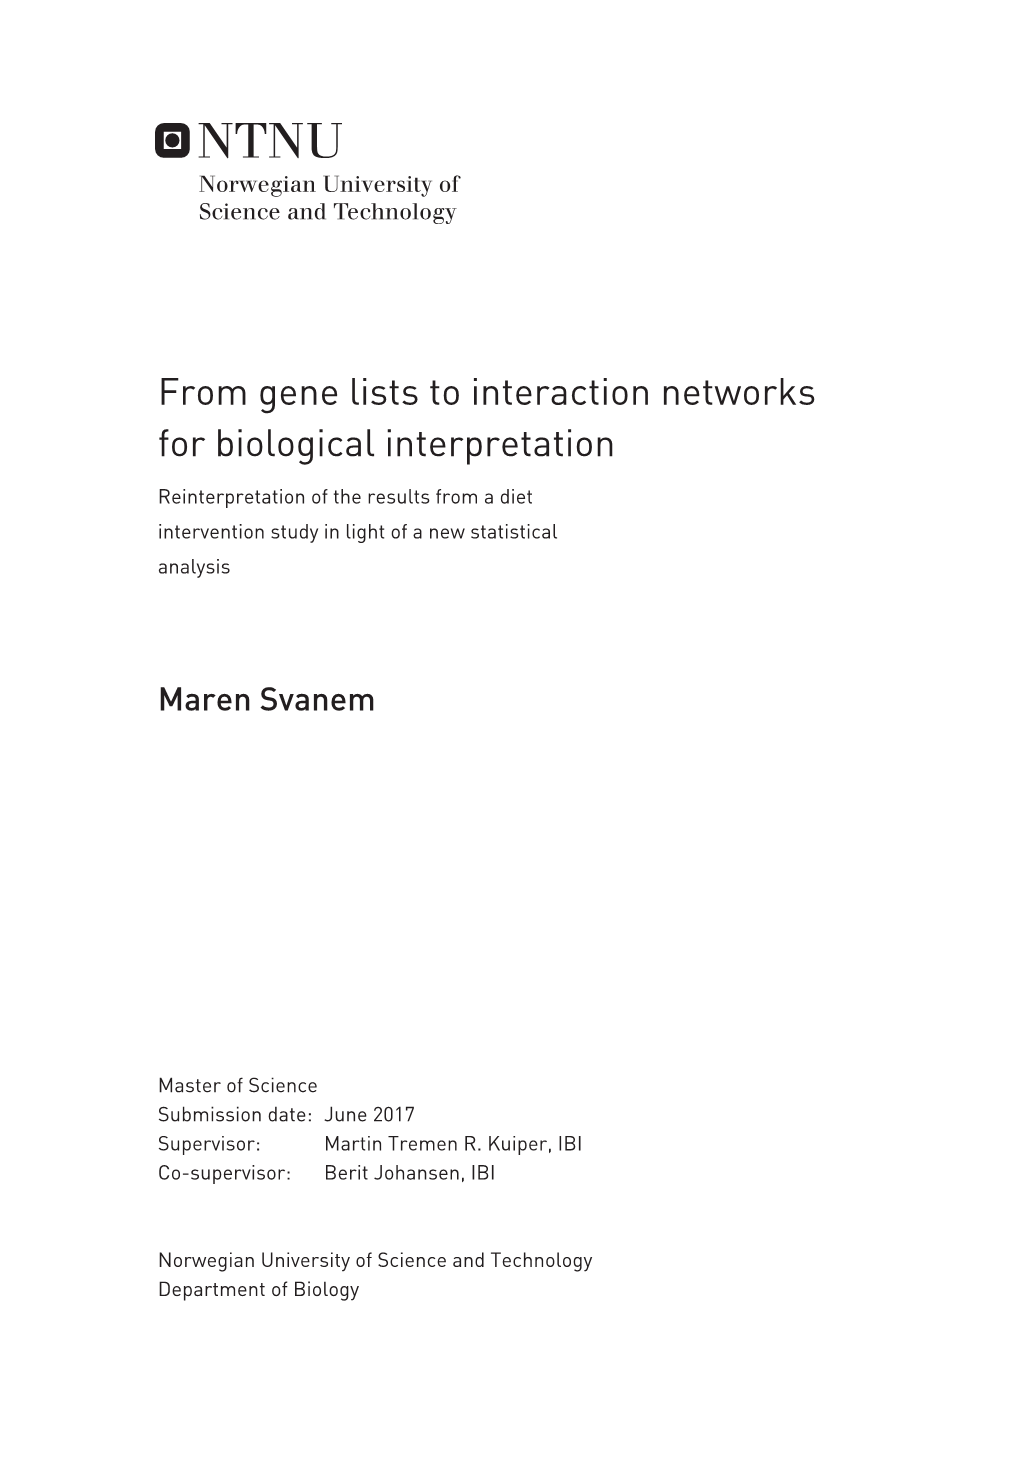 From Gene Lists to Interaction Networks for Biological Interpretation